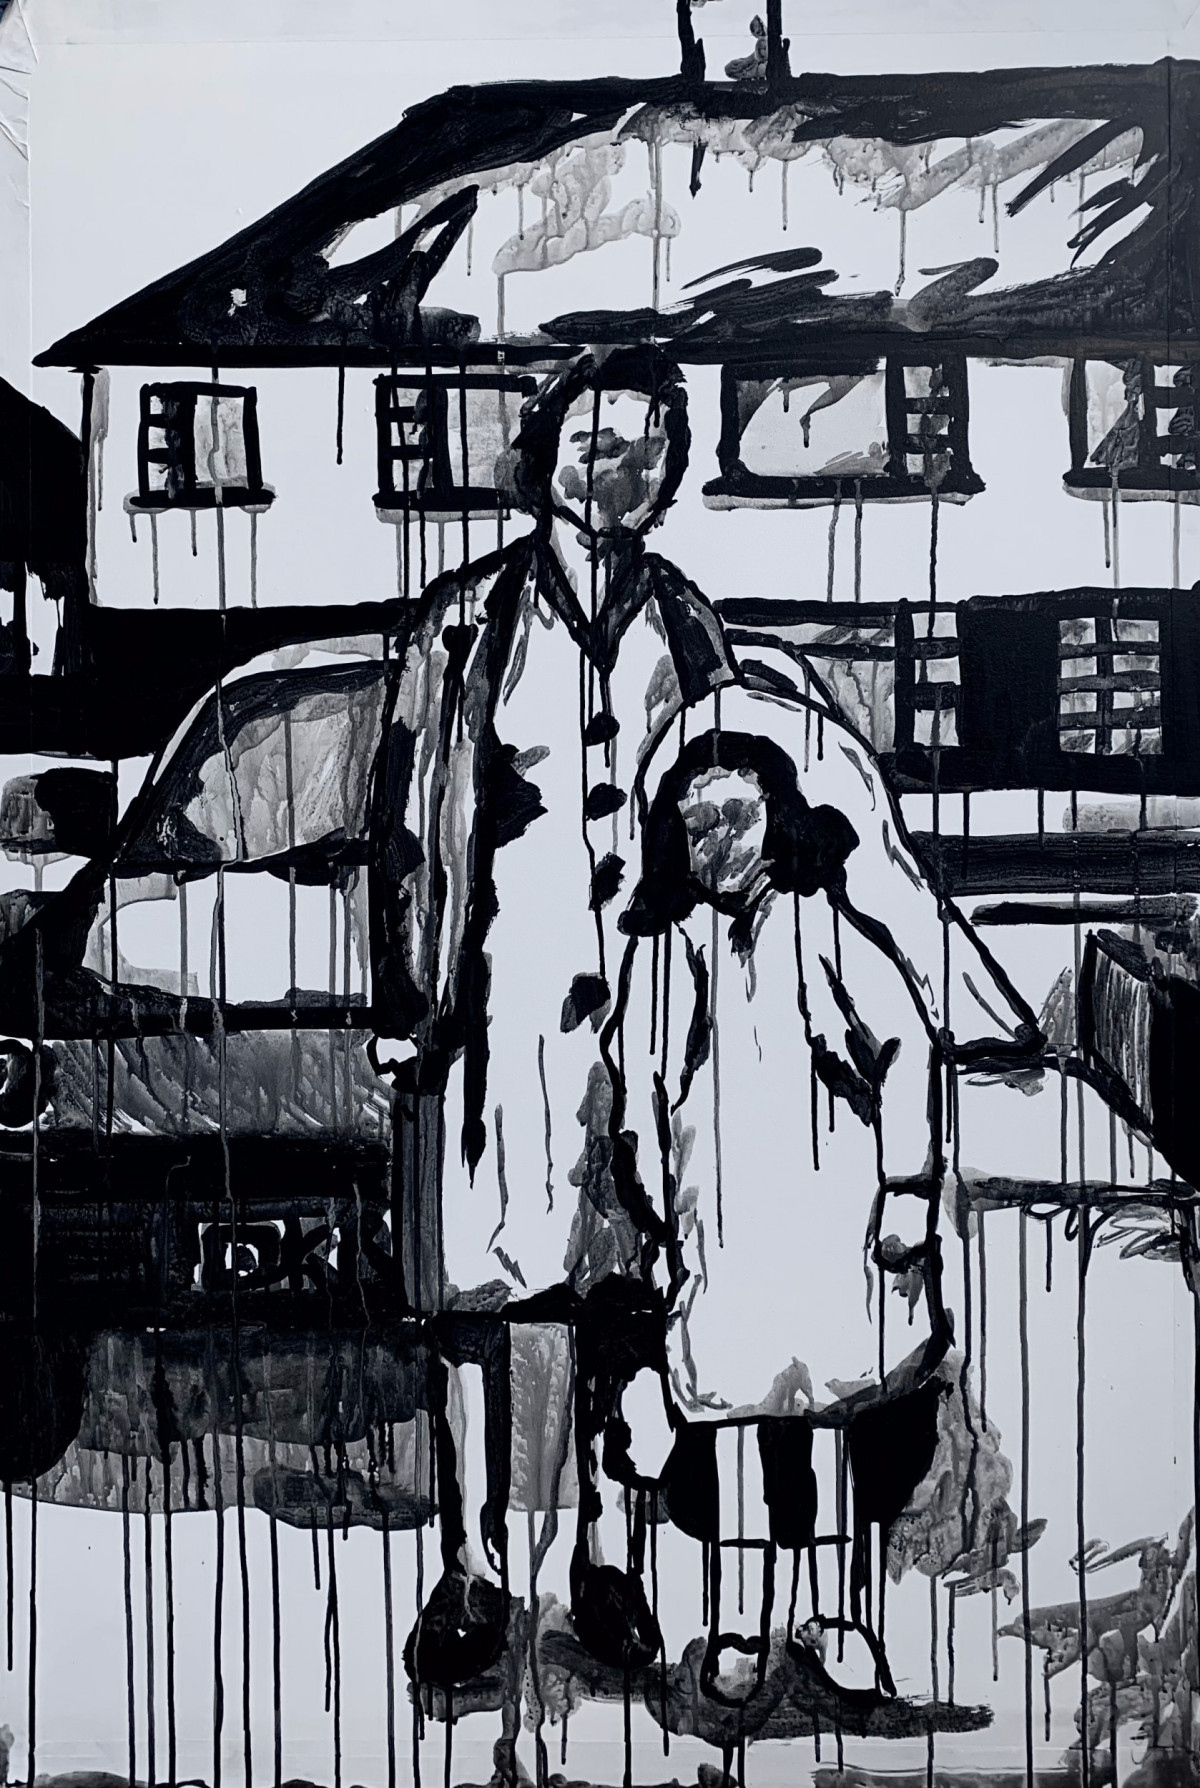 'An Unholy Day', Ink on primed plasterboard, 80 x 120cm